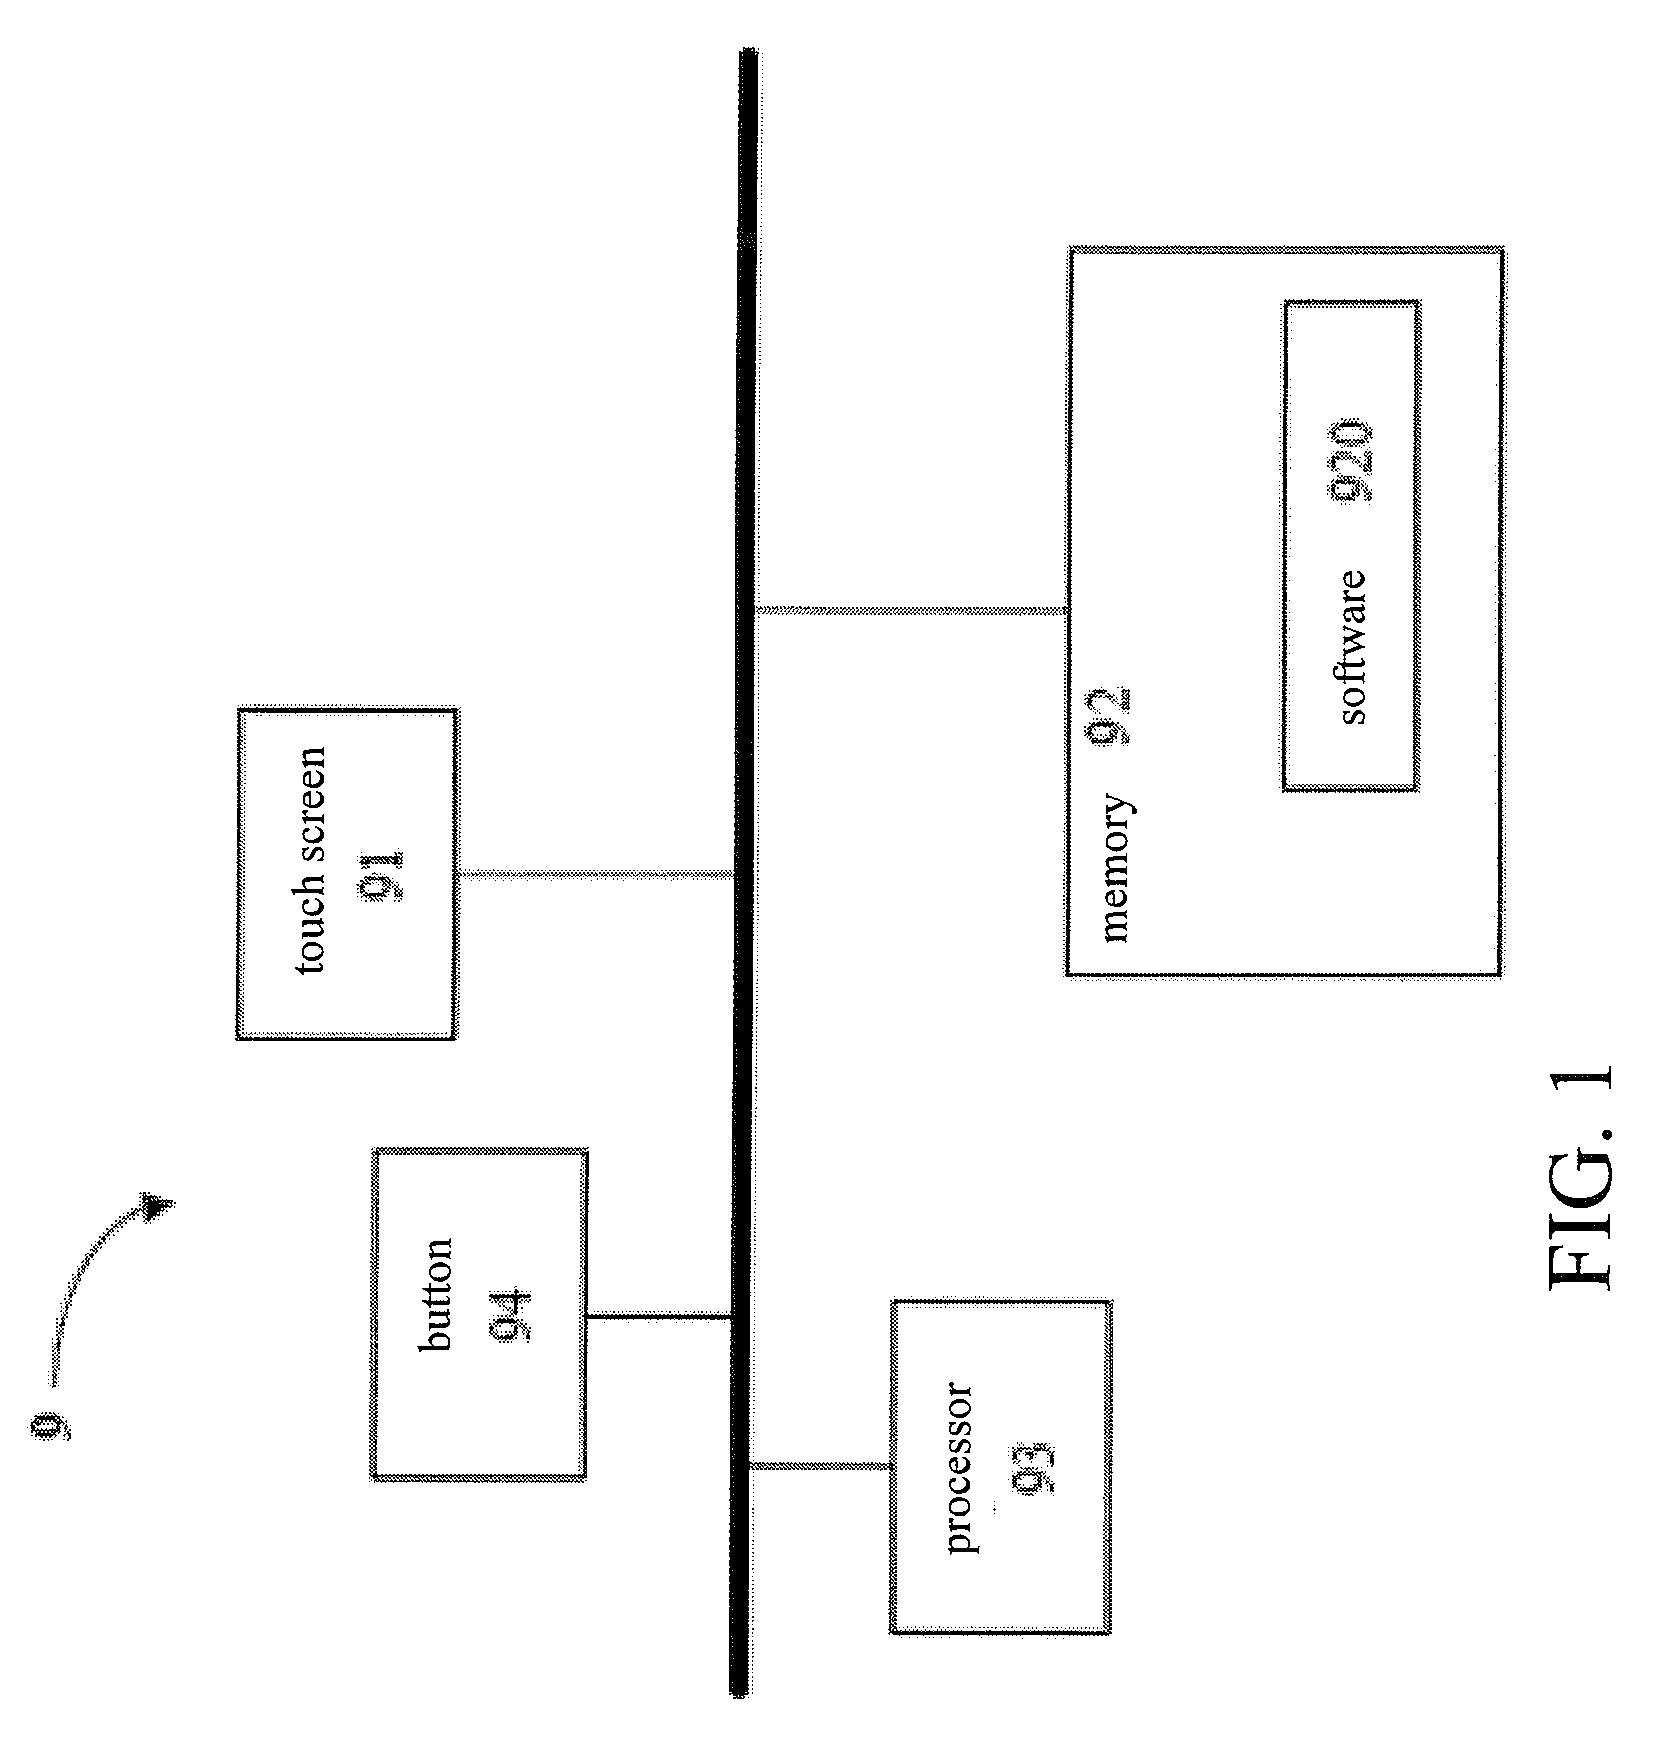 Method for Controlling the Display of a Touch Screen, User Interface of the Touch Screen, and an Electronic Device using The Same